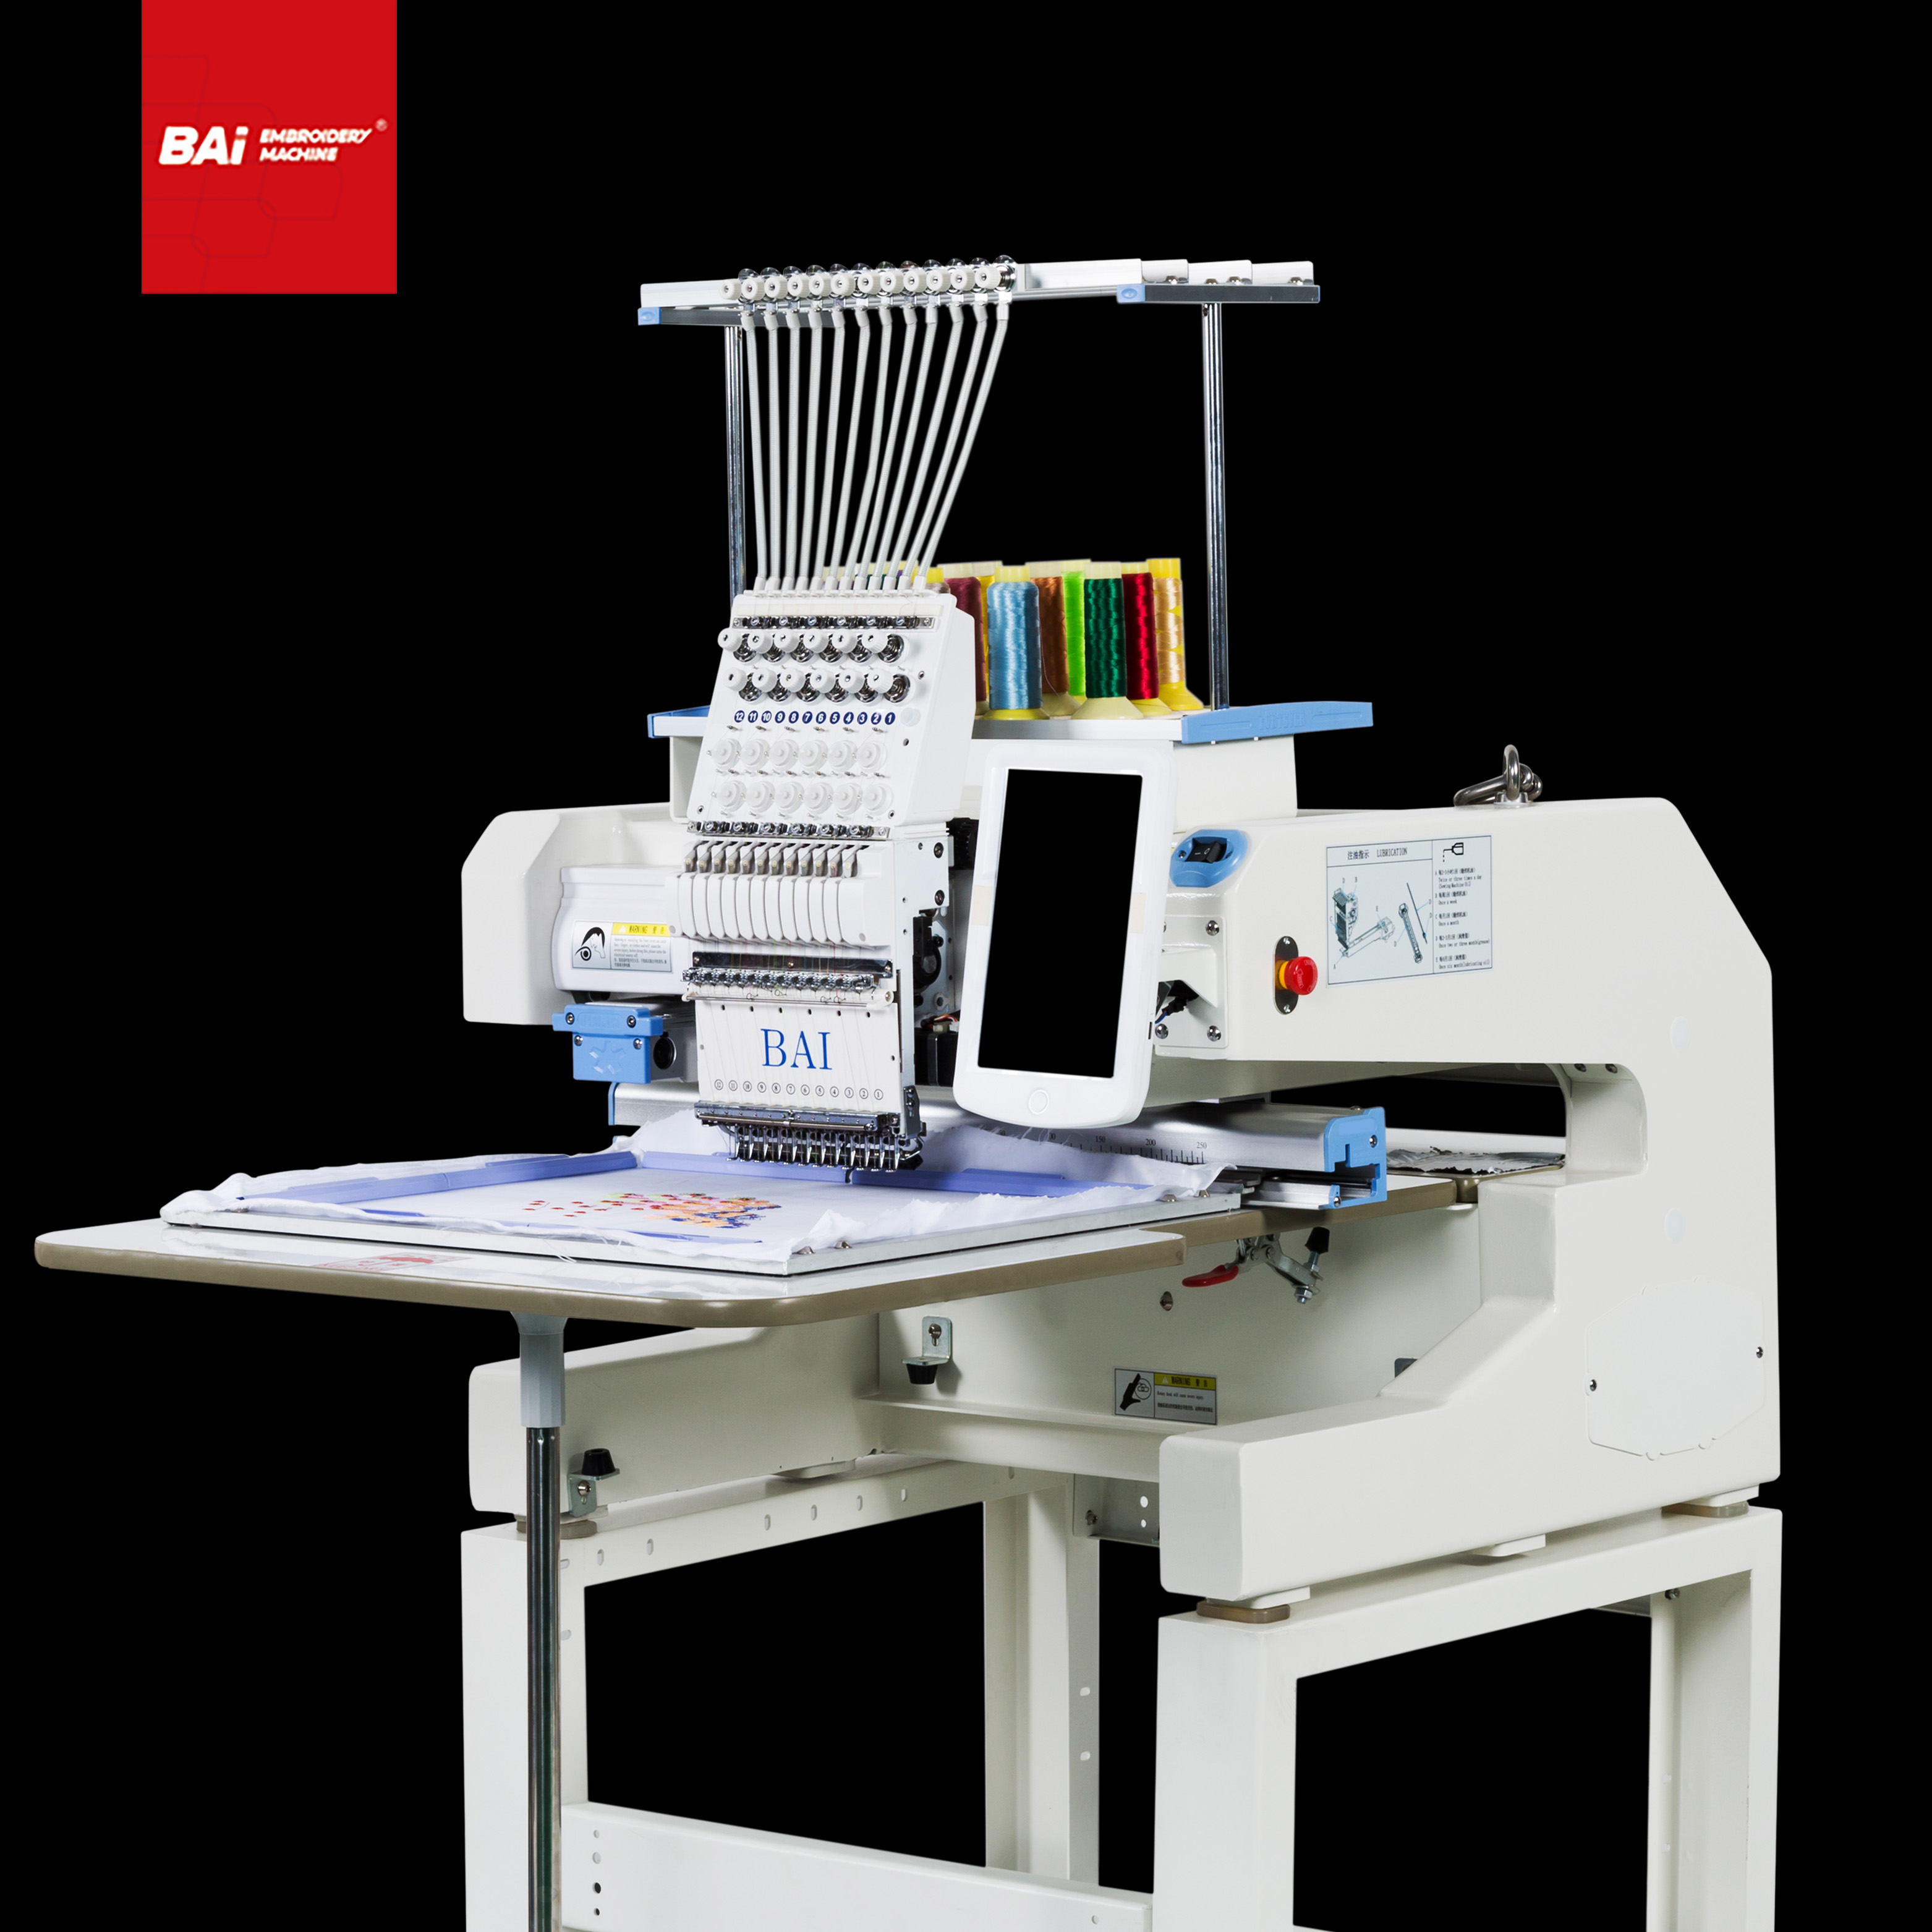 BAI Computer Embroidery Machine with Commercial for Sewing Embroidery Machine